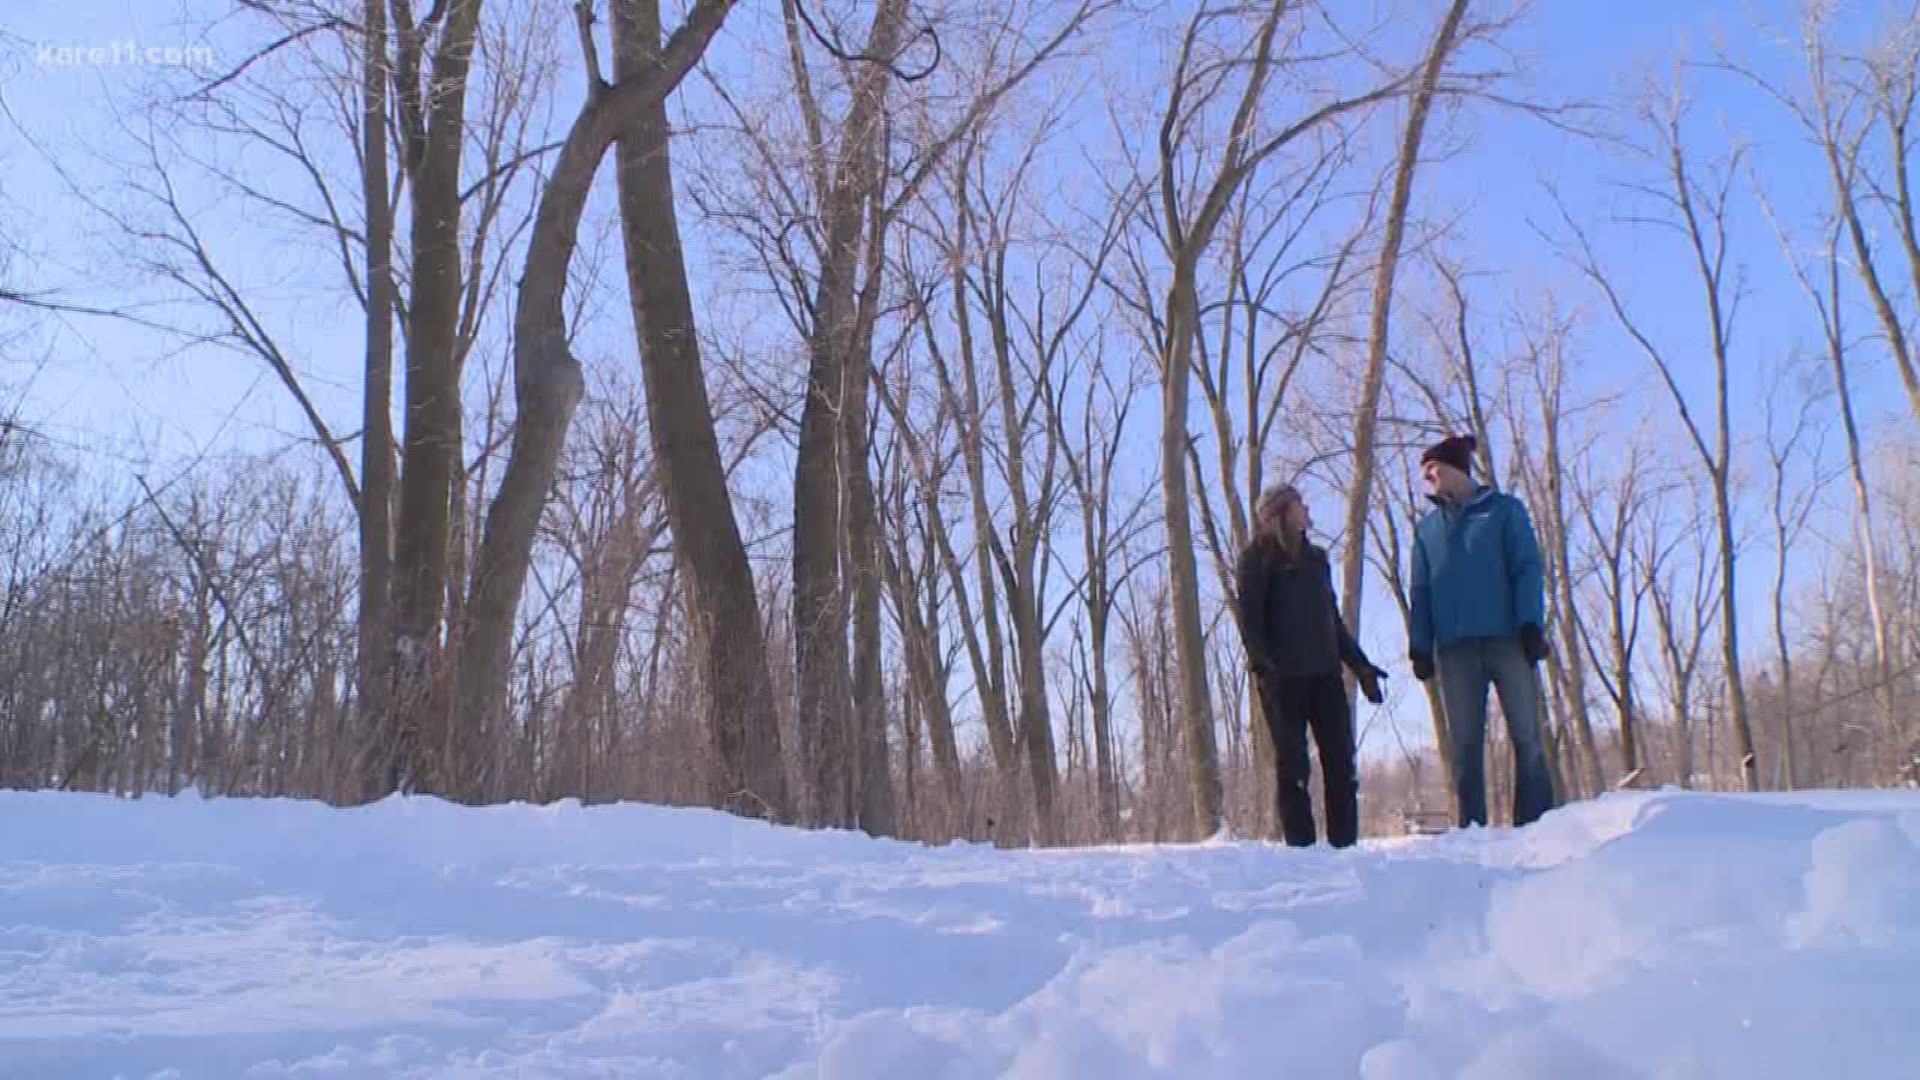 KARE 11's Kris Laudien continues to explore the winter wonder of Minnesota at the Westwood Hills Nature Center. https://kare11.tv/2XguX5L